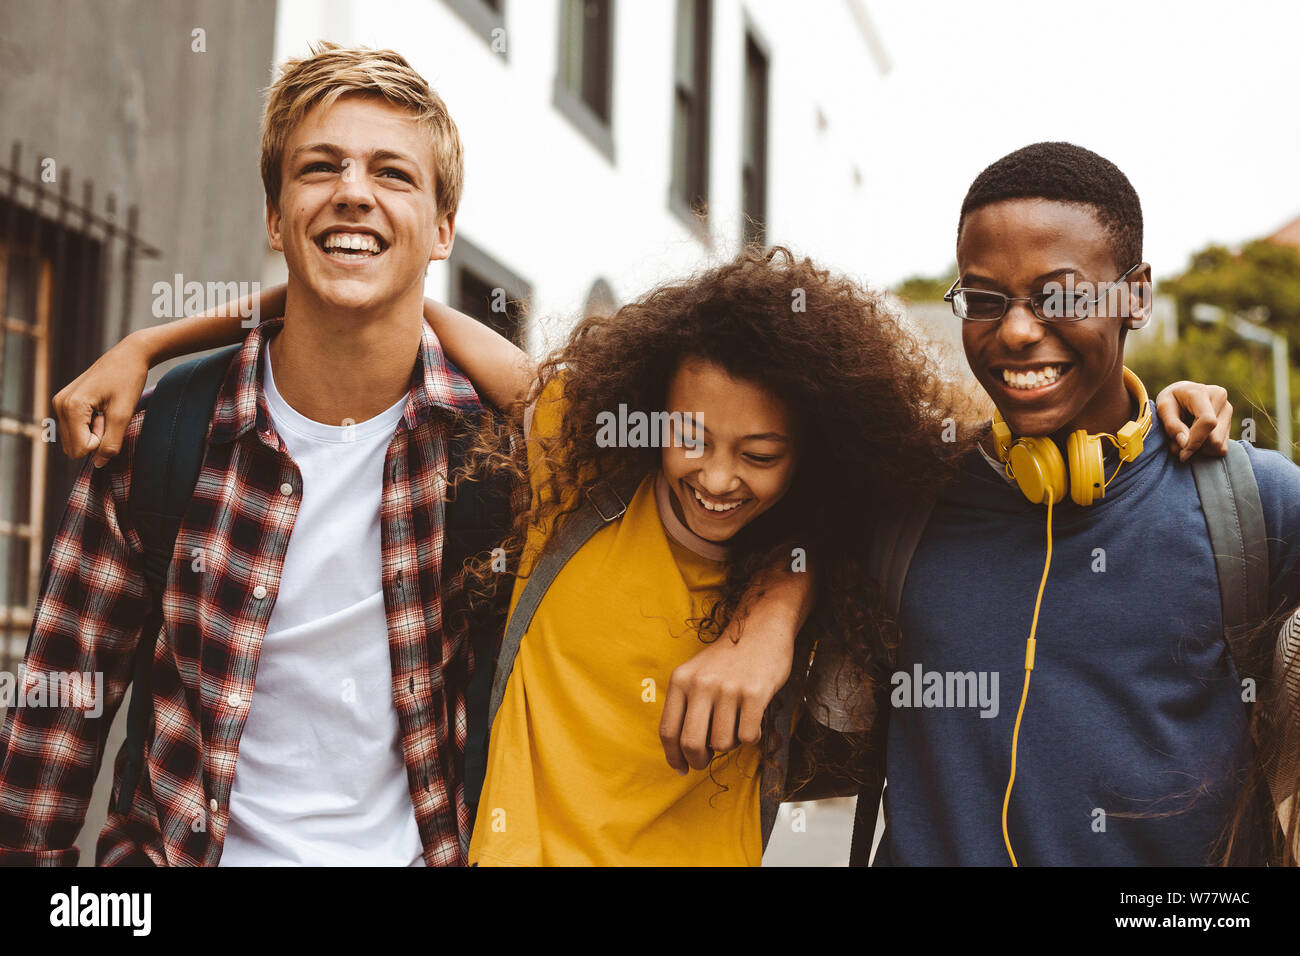 Close up of three college friends standing in the street with arms around each other. Cheerful boys and a girl wearing college bags having fun walking Stock Photo